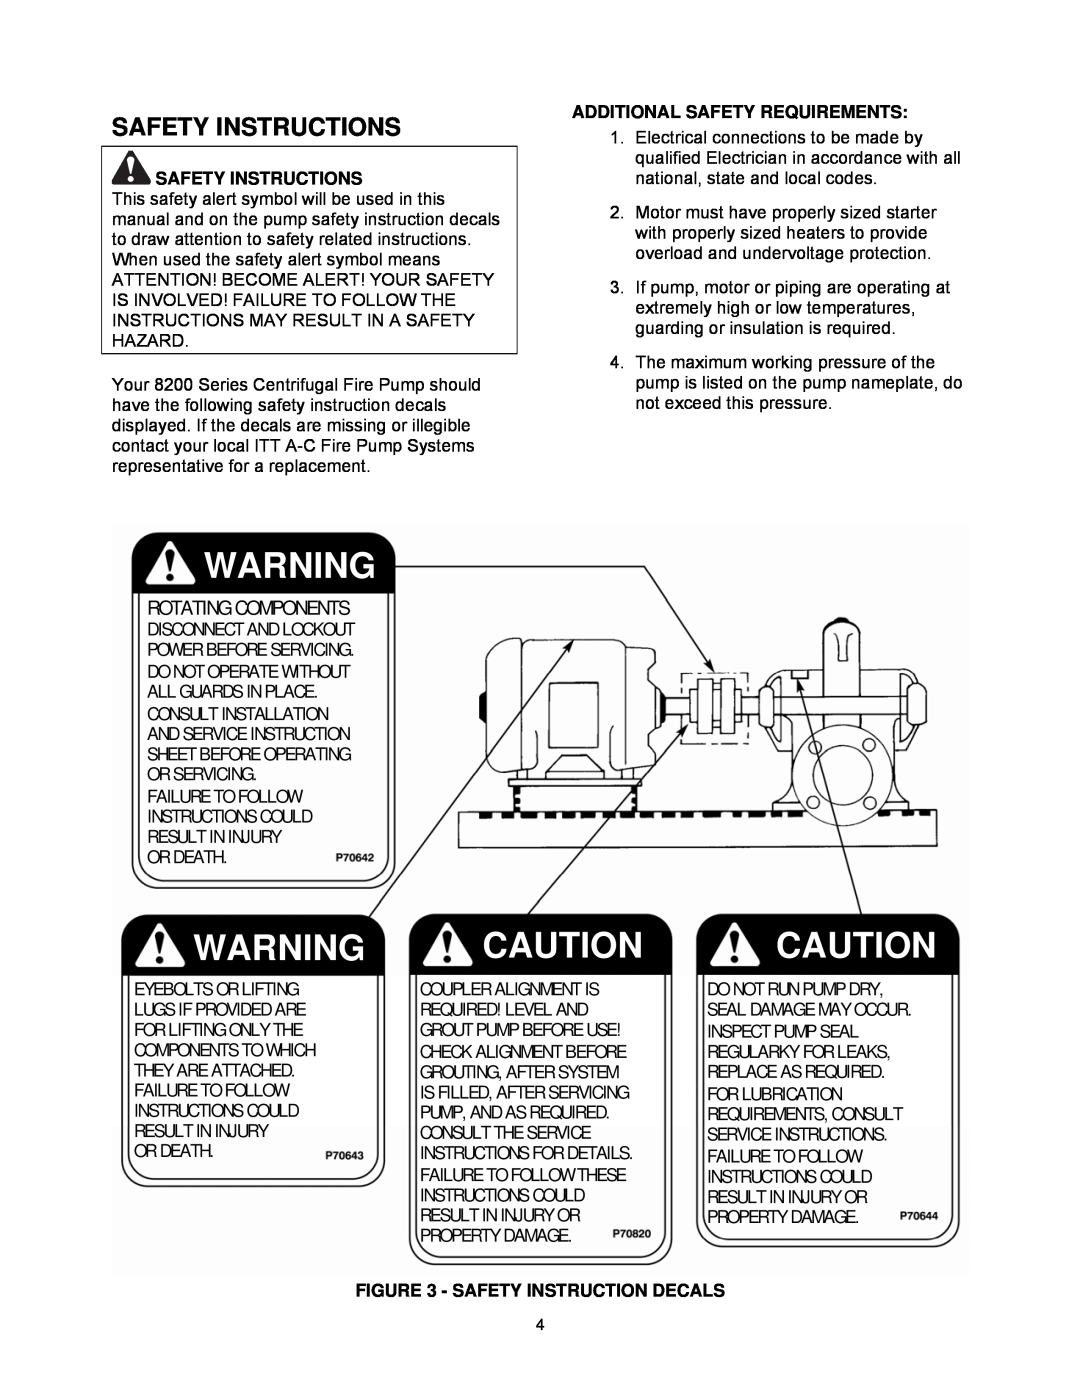 AC International 8200 Series Safety Instructions, Disconnect And Lockout Power Before Servicing, Failure To Follow 